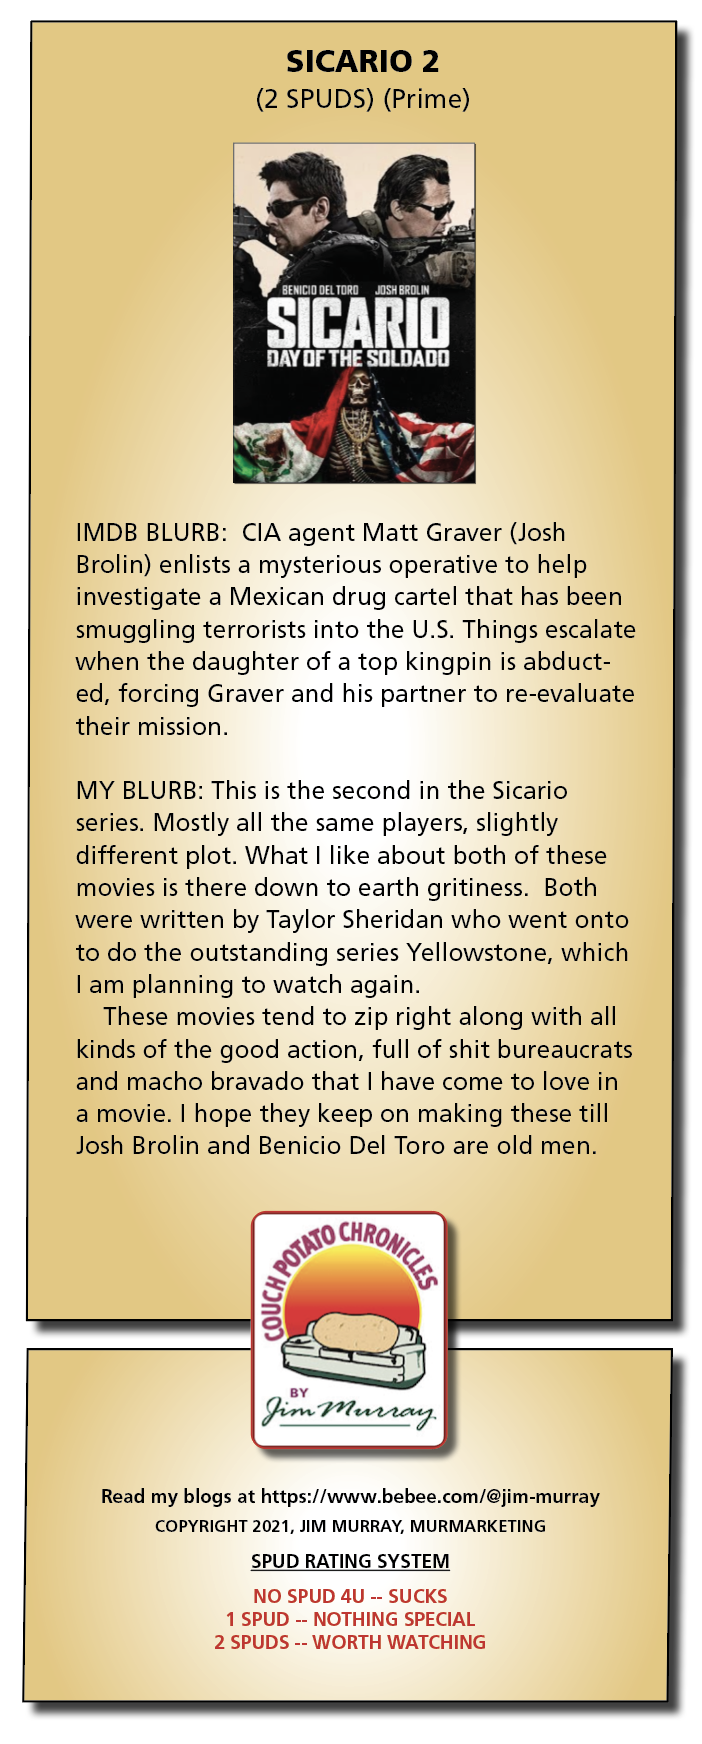 SICARIO 2

(2 SPUDS) (Prime)

 

IMDB BLURB: CIA agent Matt Graver (Josh
Brolin) enlists a mysterious operative to help
investigate a Mexican drug cartel that has been
smuggling terrorists into the U.S. Things escalate
when the daughter of a top kingpin is abduct-
ed, forcing Graver and his partner to re-evaluate
their mission.

MY BLURB: This is the second in the Sicario
series. Mostly all the same players, slightly
different plot. What | like about both of these
movies is there down to earth gritiness. Both
were written by Taylor Sheridan who went onto
to do the outstanding series Yellowstone, which
I am planning to watch again.

These movies tend to zip right along with all
kinds of the good action, full of shit bureaucrats
and macho bravado that | have come to love in
a movie. | hope they keep on making these till
Josh Brolin and Benicio Del Toro are old men.

 
       

von Per tae

 
 
   
  
  
 

Read my blogs at https://www.bebee.com/@jim-murray
COPYRIGHT 2021, JIM MURRAY, MURMARKETING
SPUD RATING SYSTEM

NO SPUD 4U -- SUCKS
1 SPUD -- NOTHING SPECIAL
2 SPUDS -- WORTH WATCHING